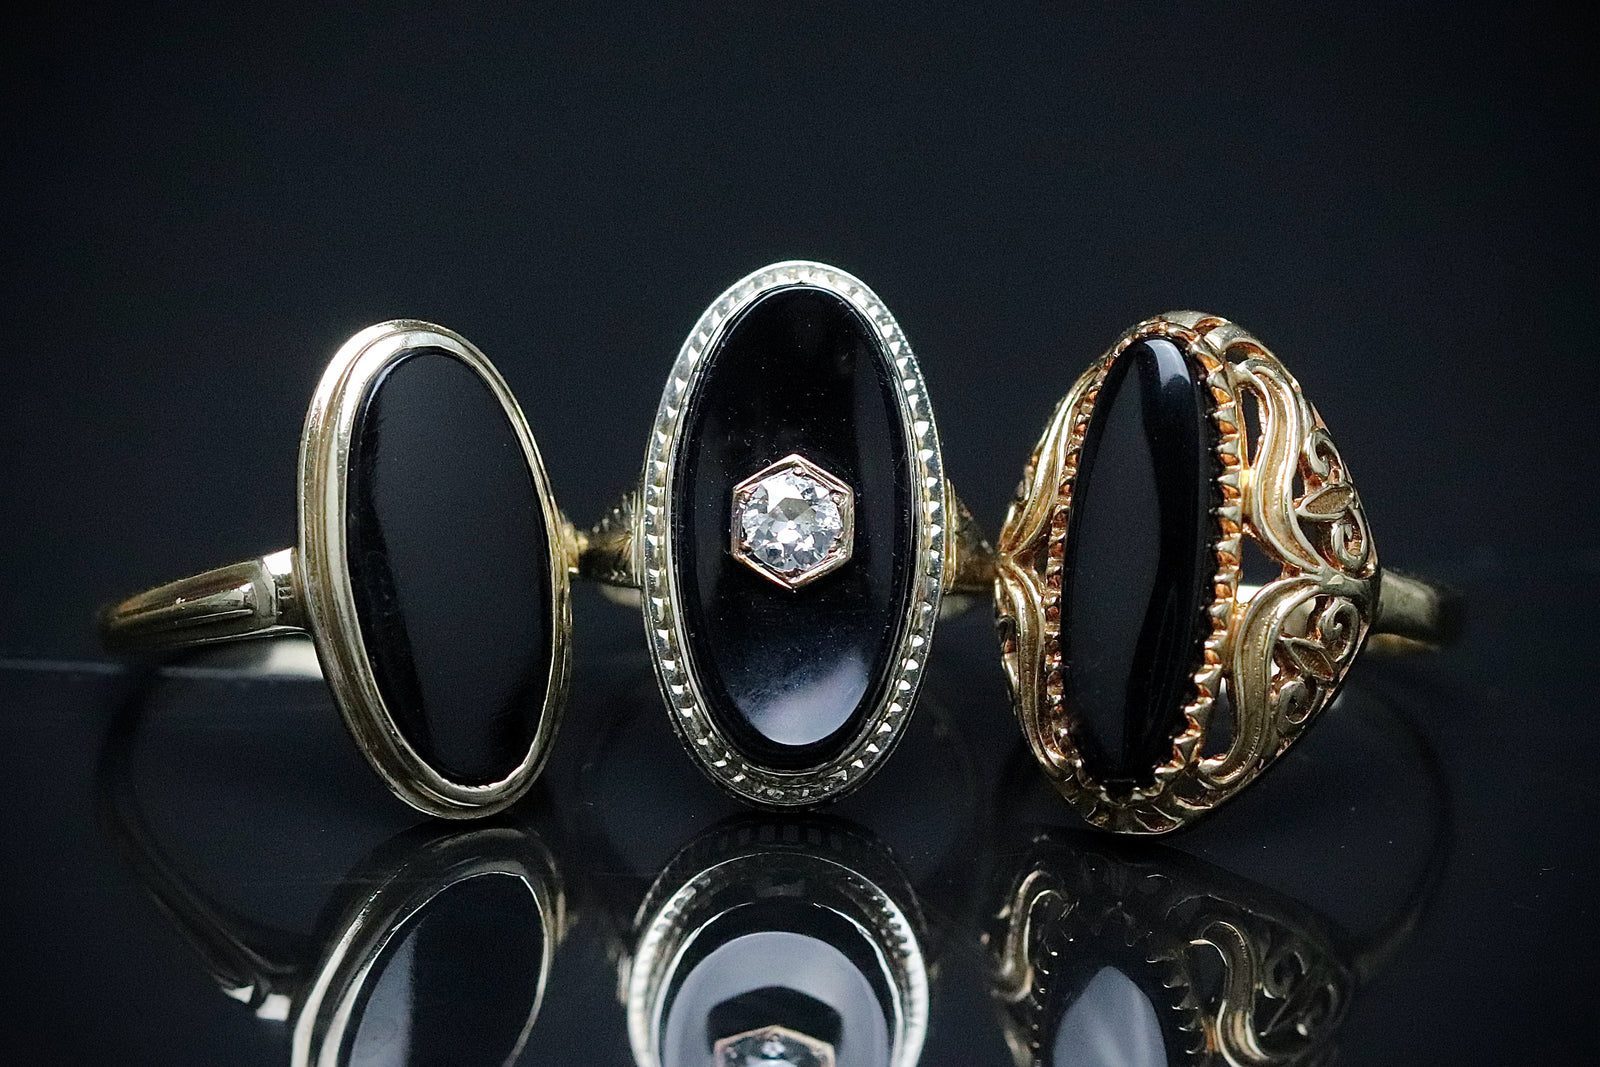 Vintage onyx rings in yellow and white gold from Manor Jewels